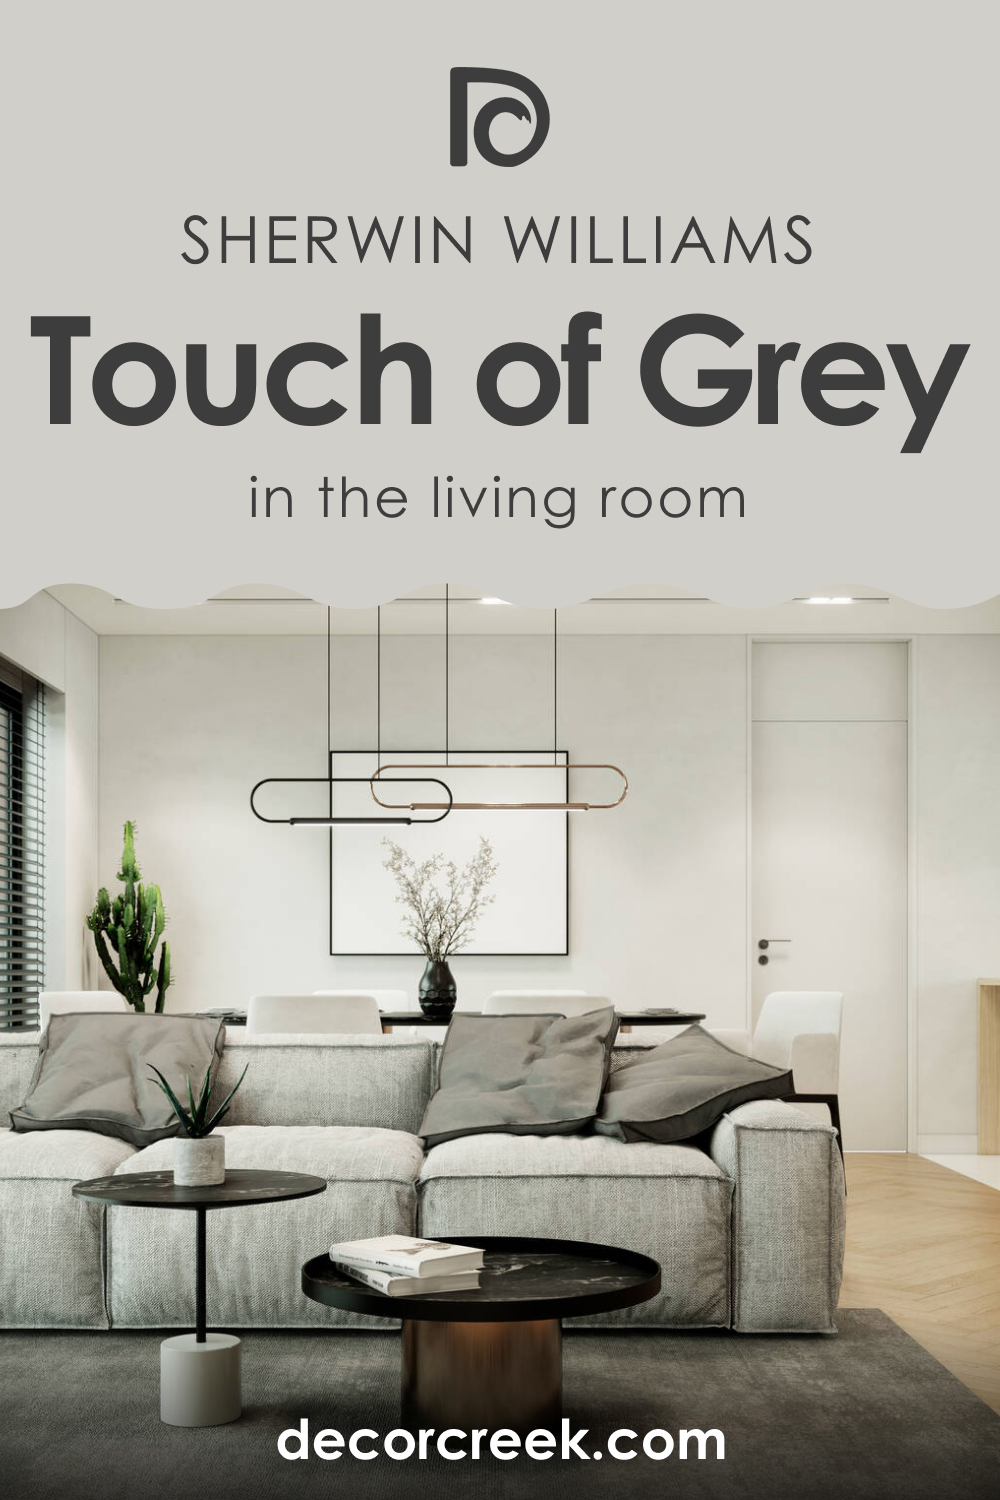 How to Use SW 9549 Touch of Grey in the Living Room?